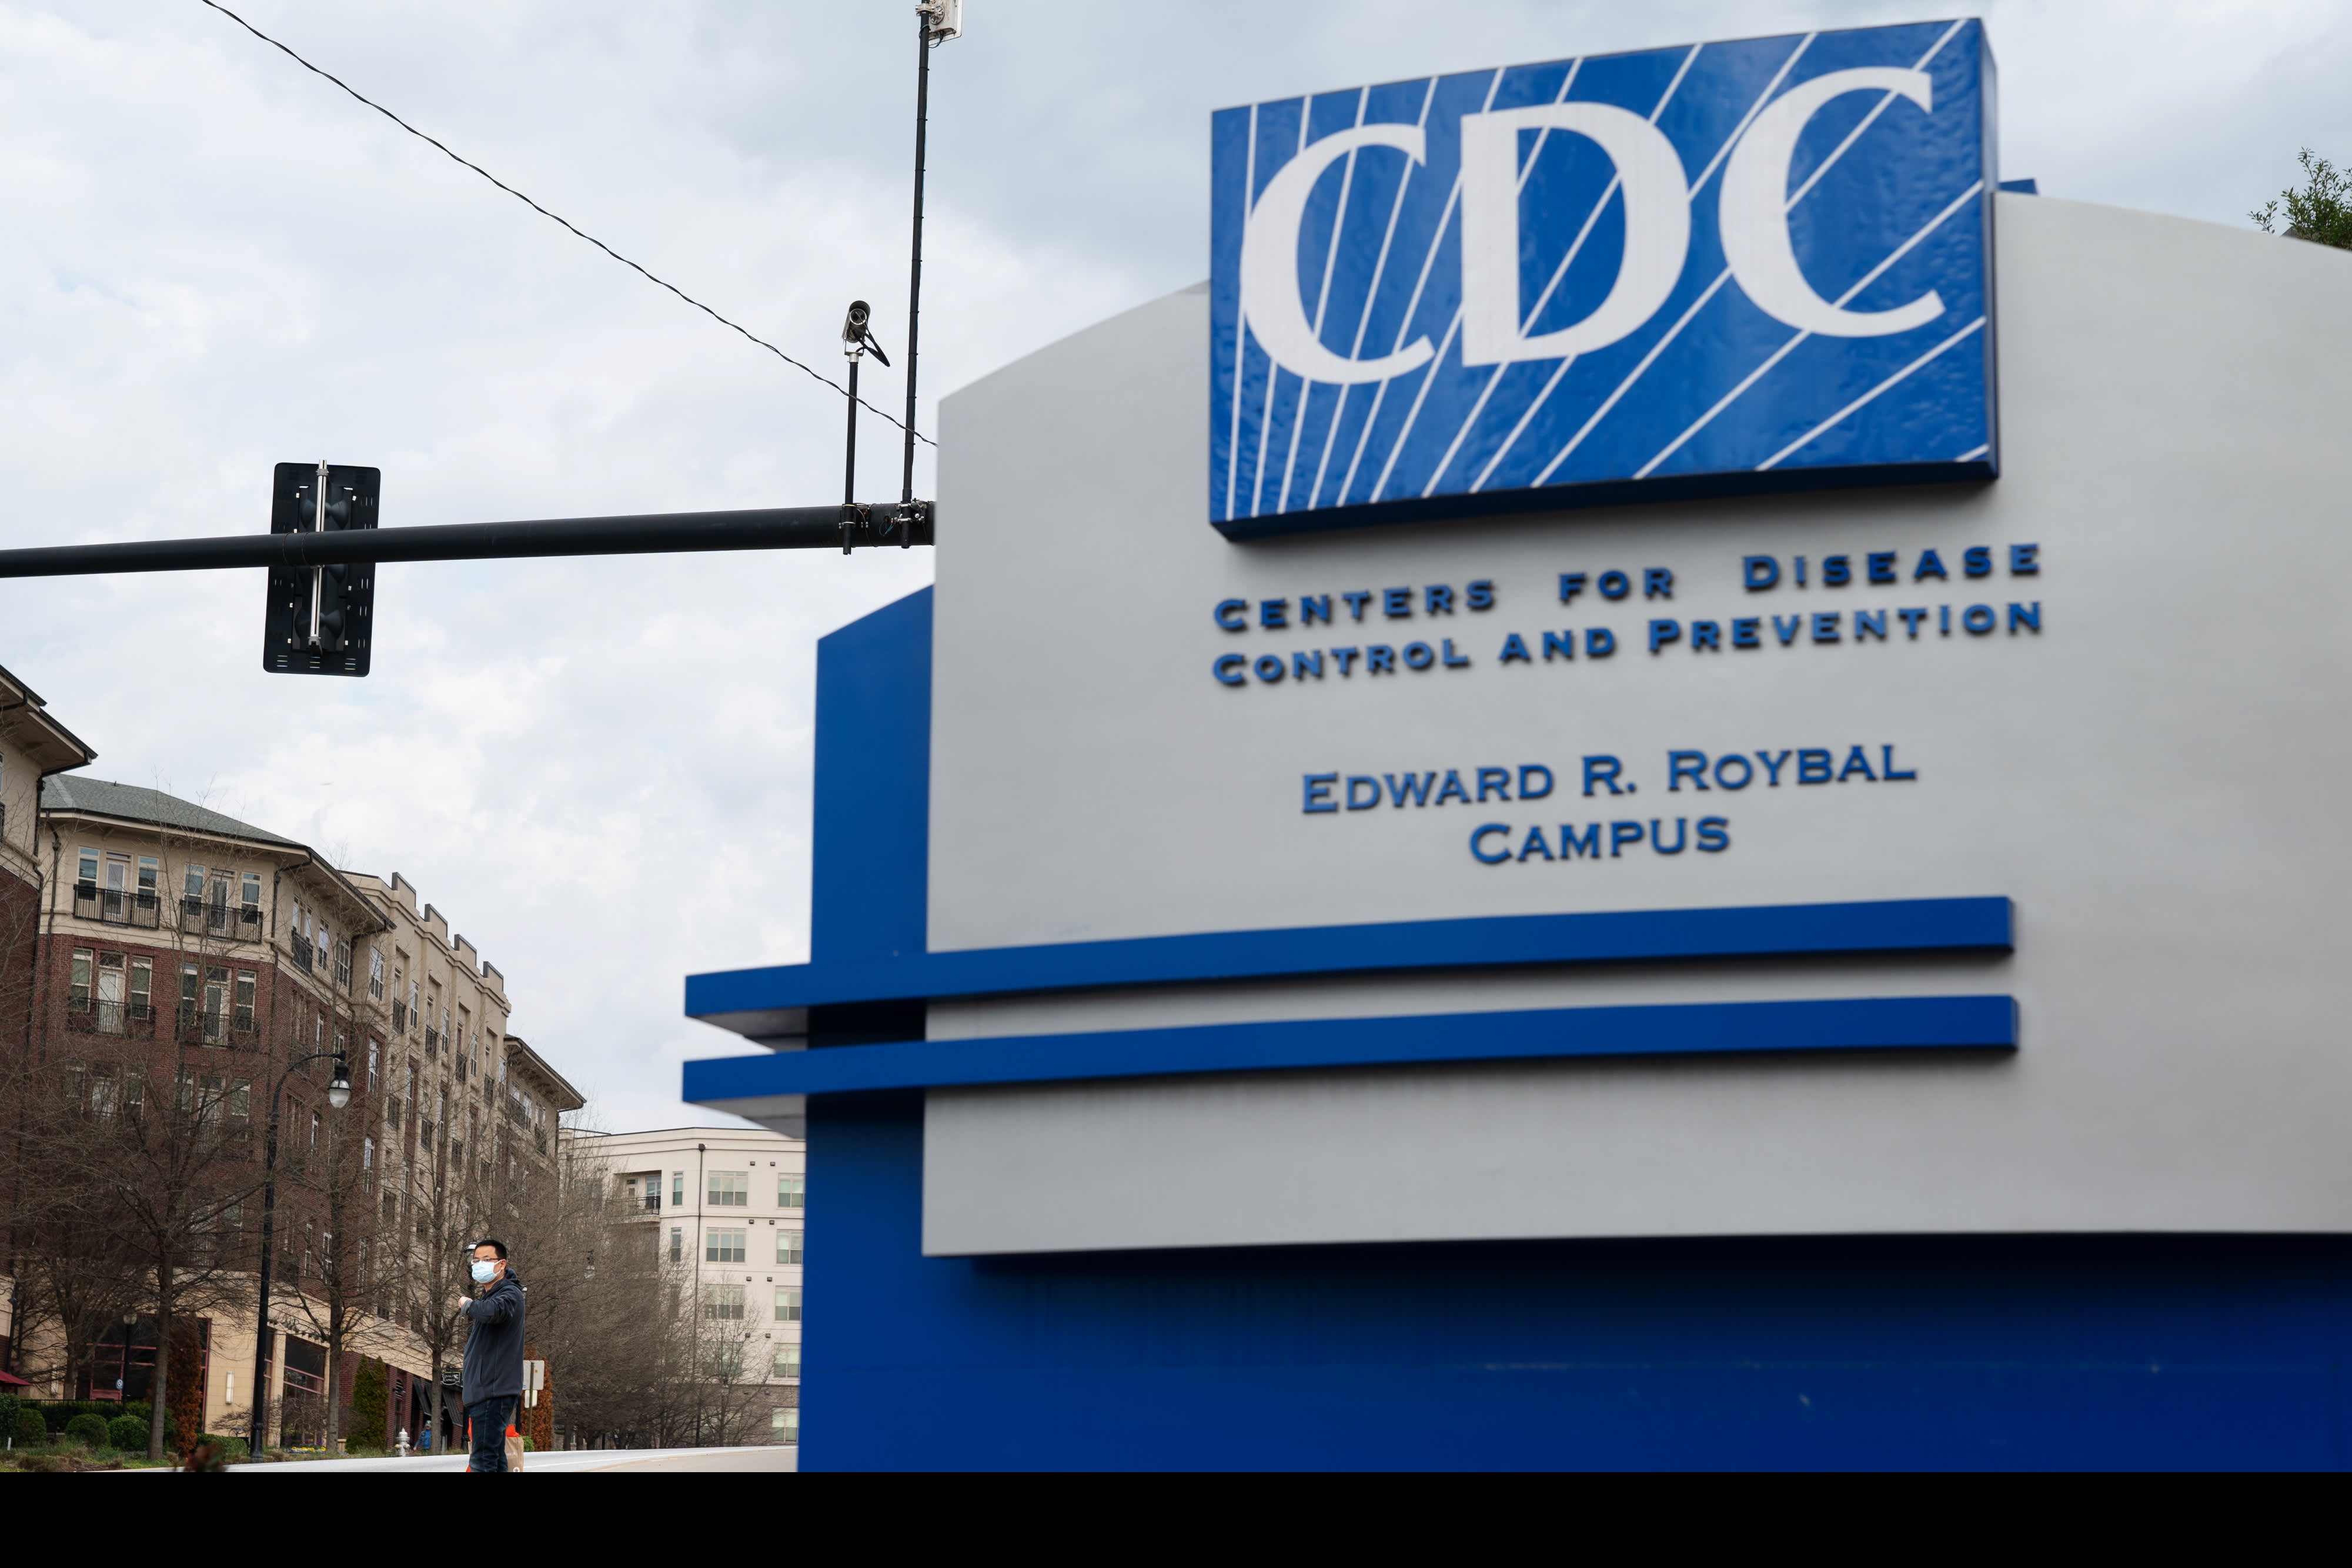 CDC says new Covid tensions in US could hamper hospitals with heavy pressure